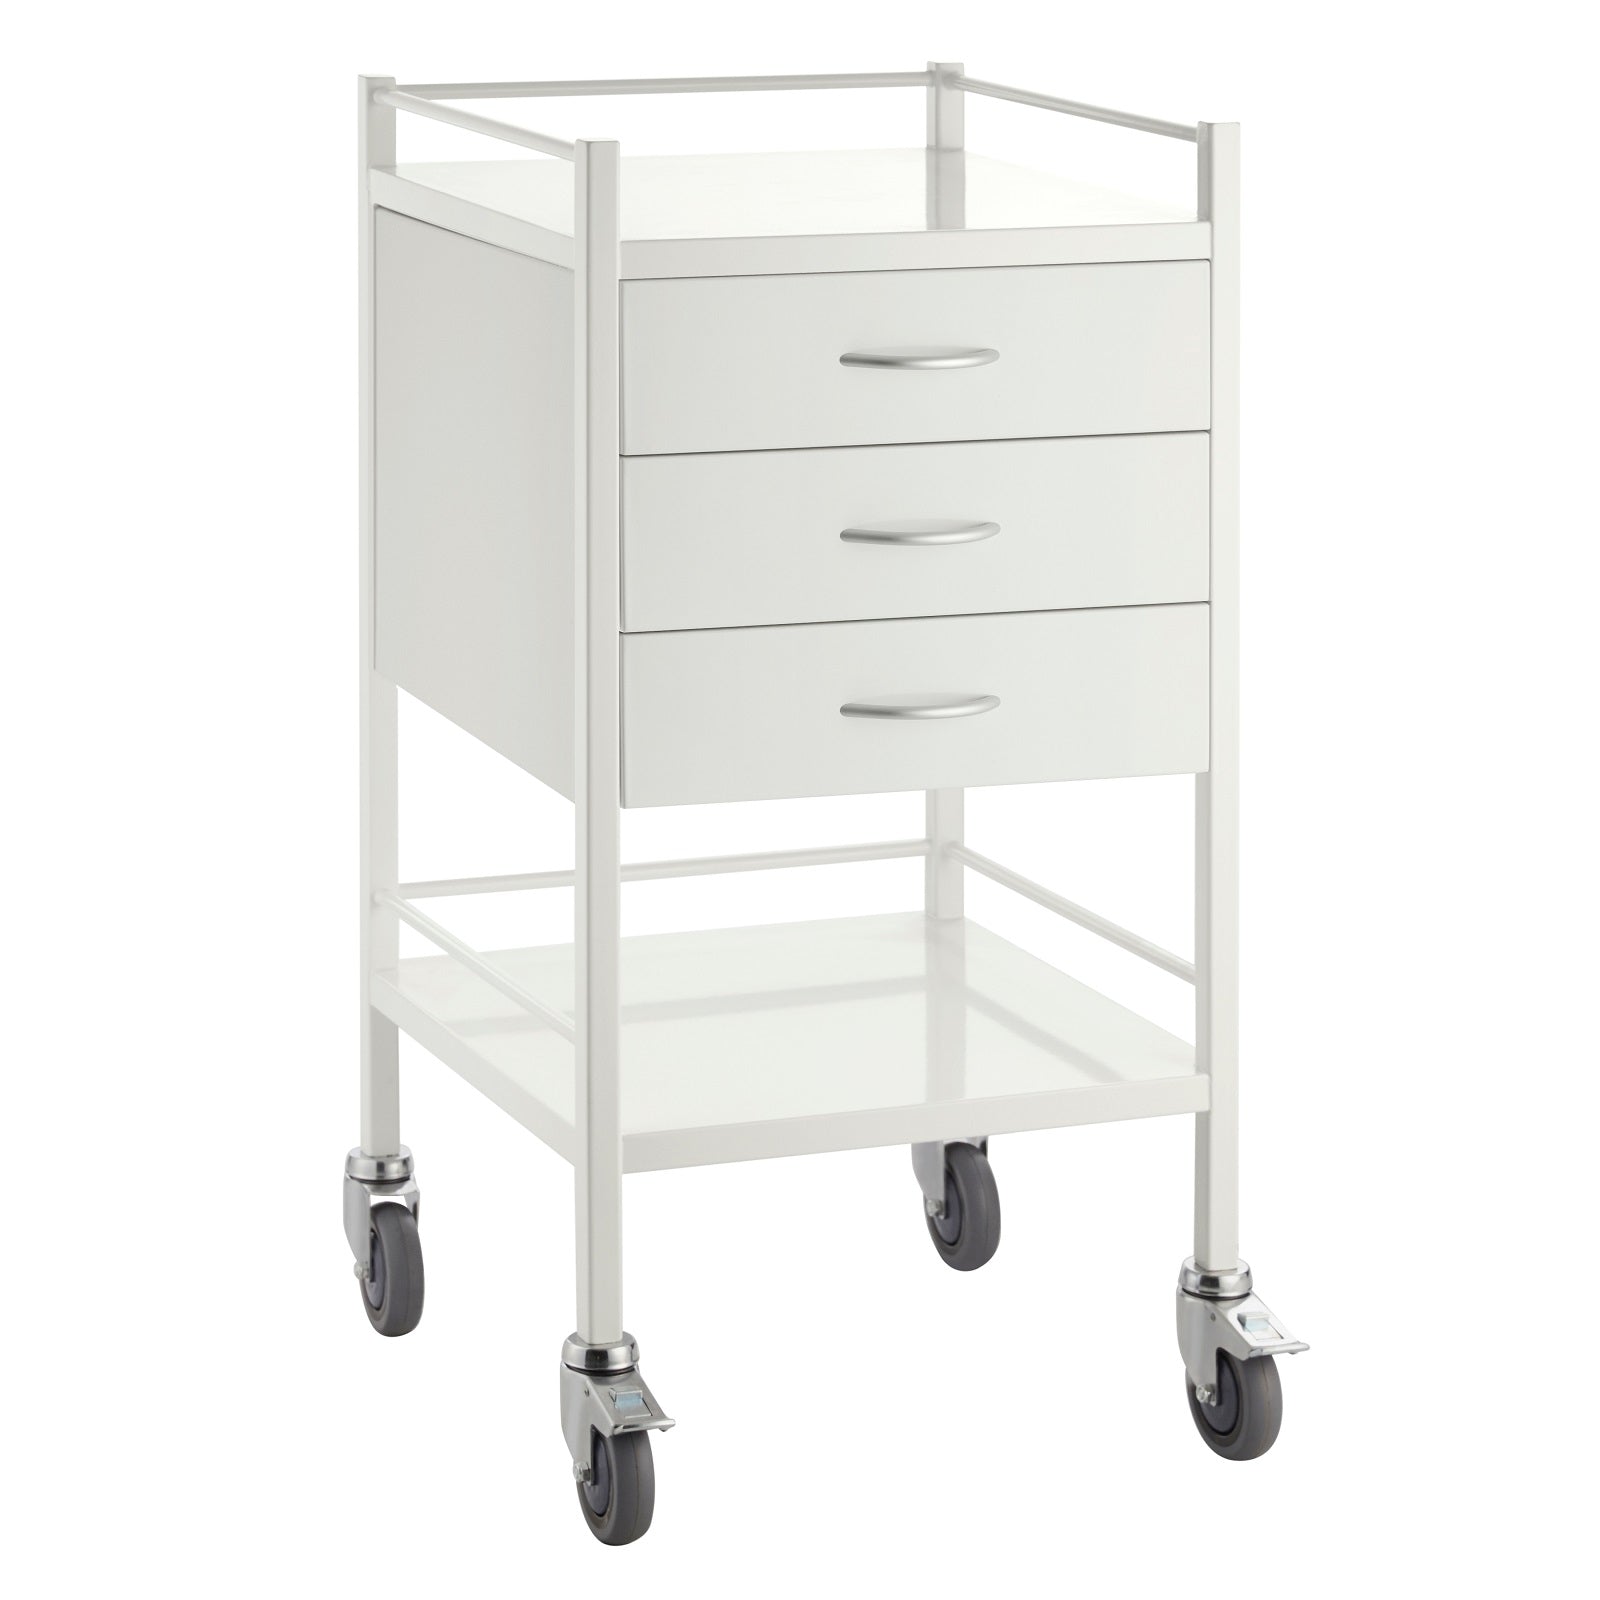 With smooth castors, an outstanding finish our three drawer powder coated trolley is a great alternative to stainless.